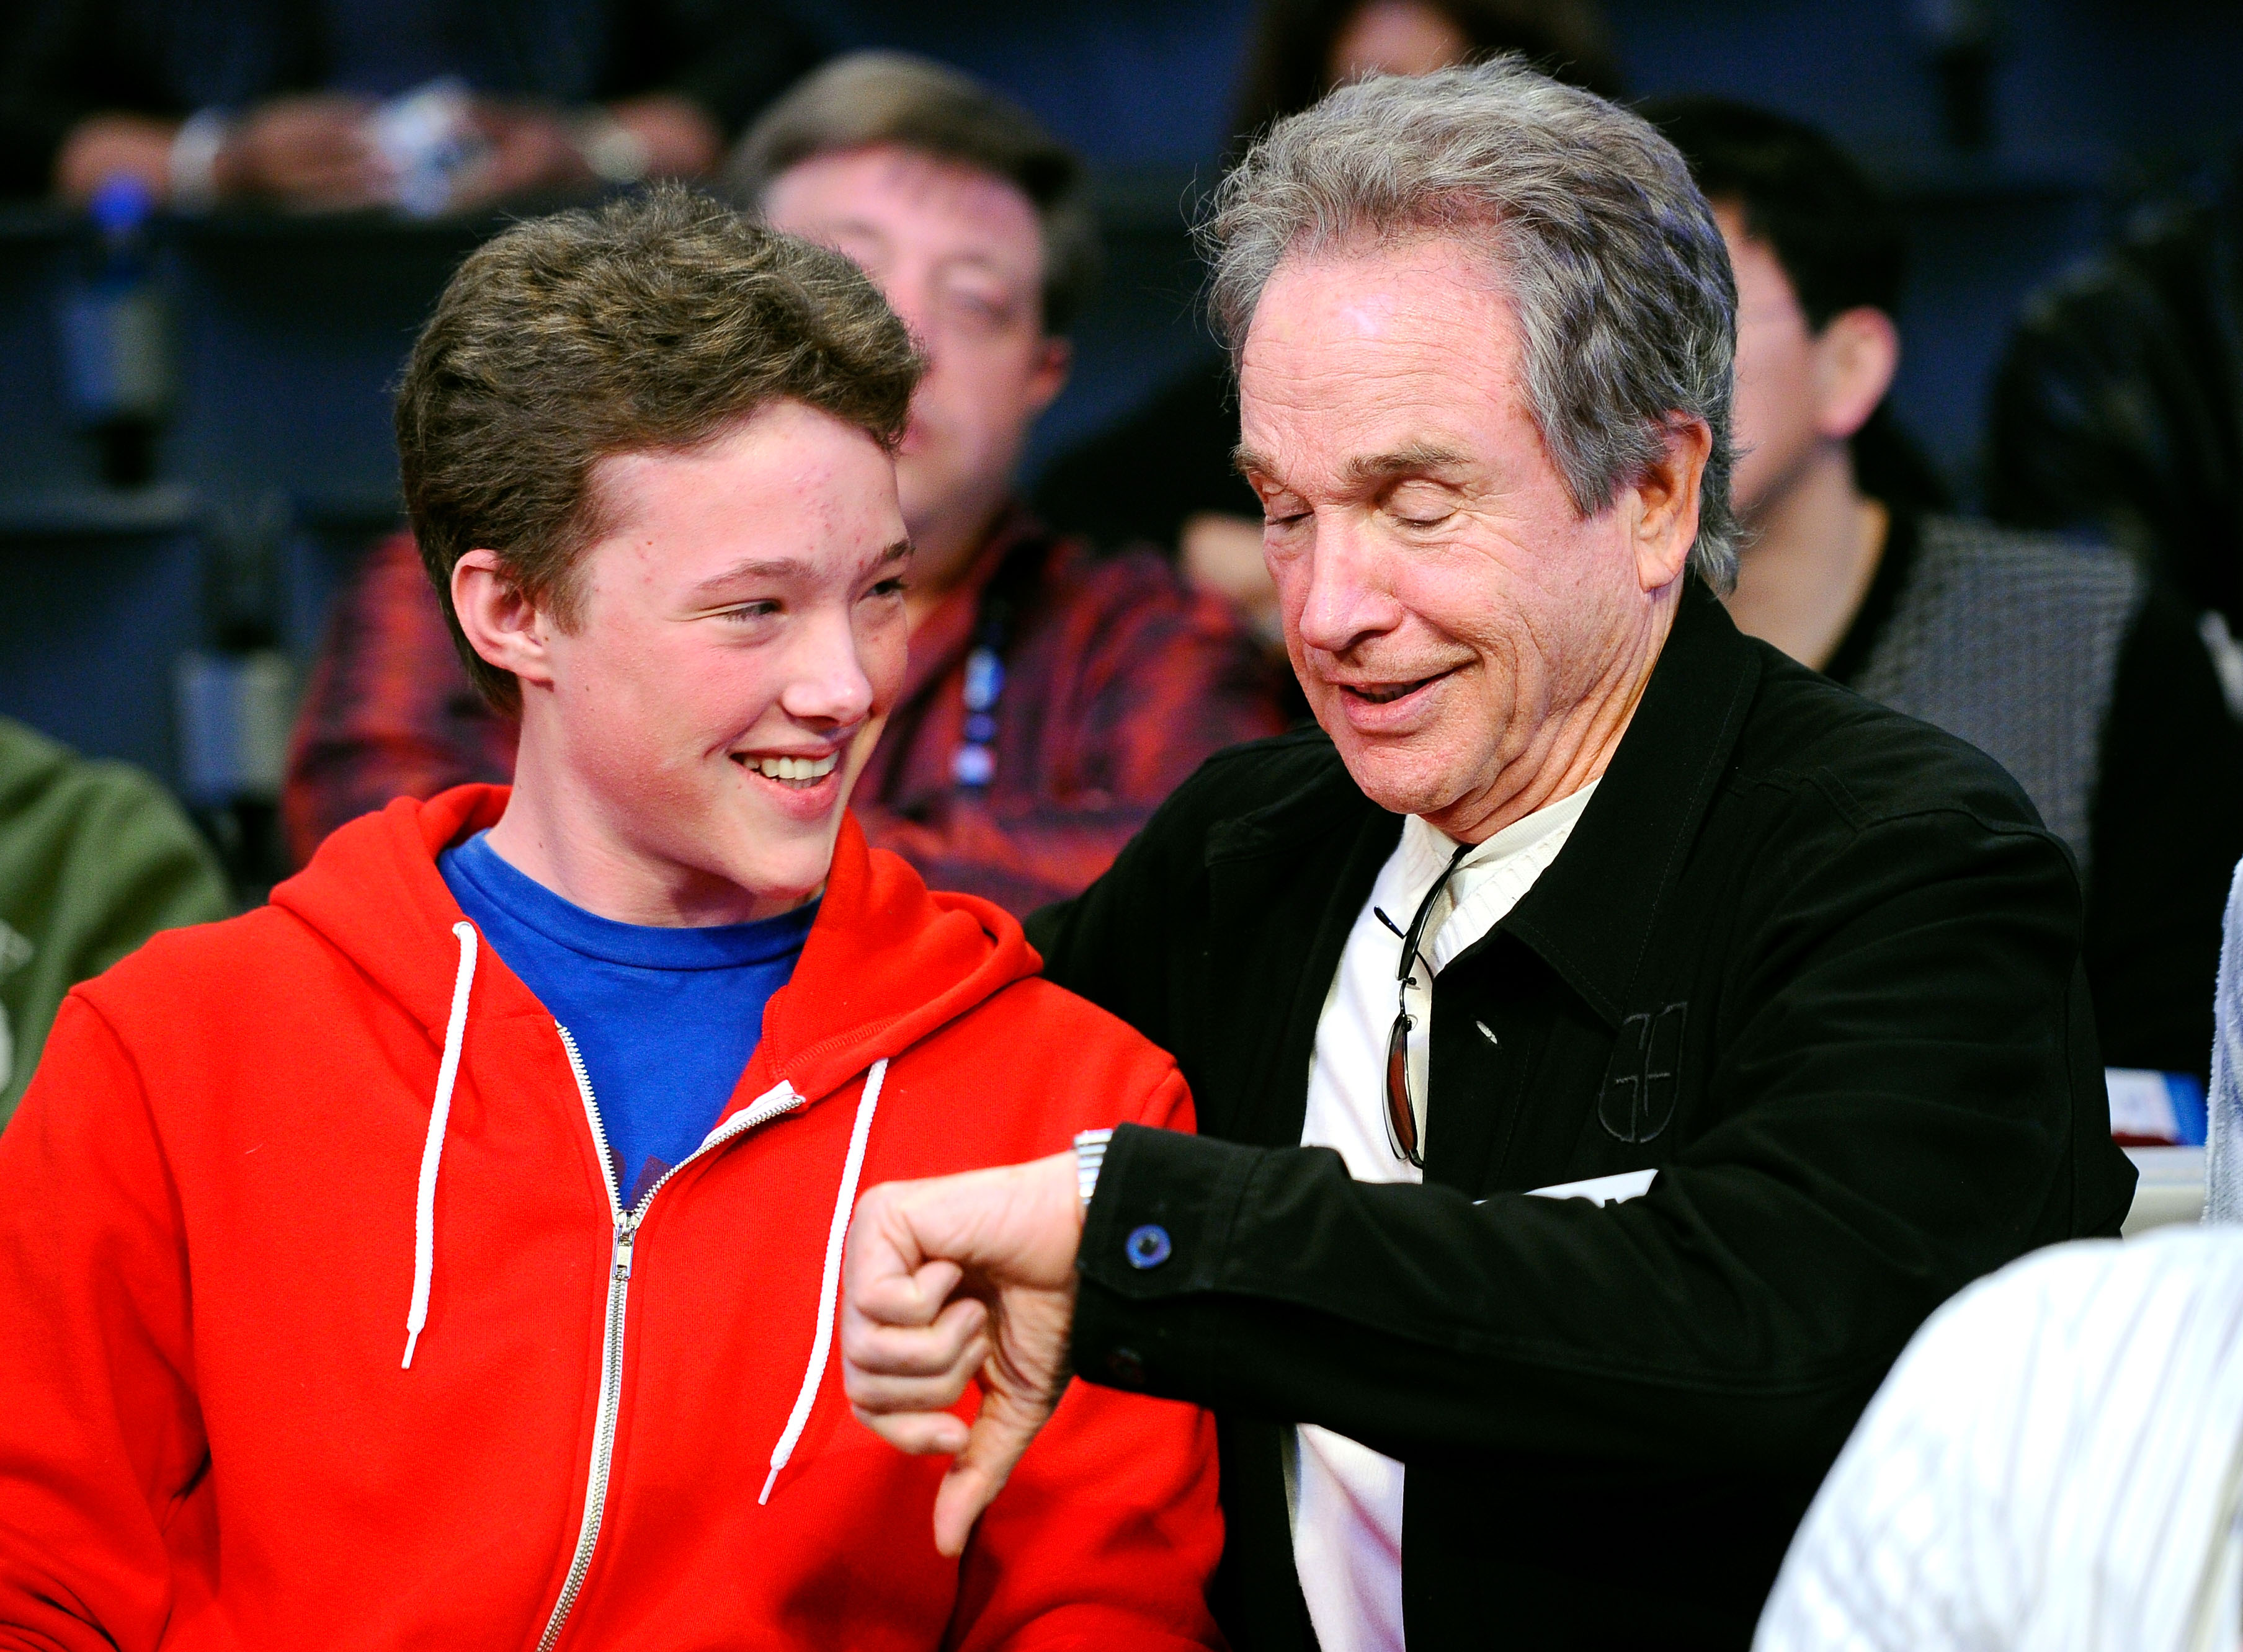 Warren Beatty and his son Benjamin during the 2011 NBA All-Star game at Staples Center on February 20, 2011 in Los Angeles, California | Source: Getty Images